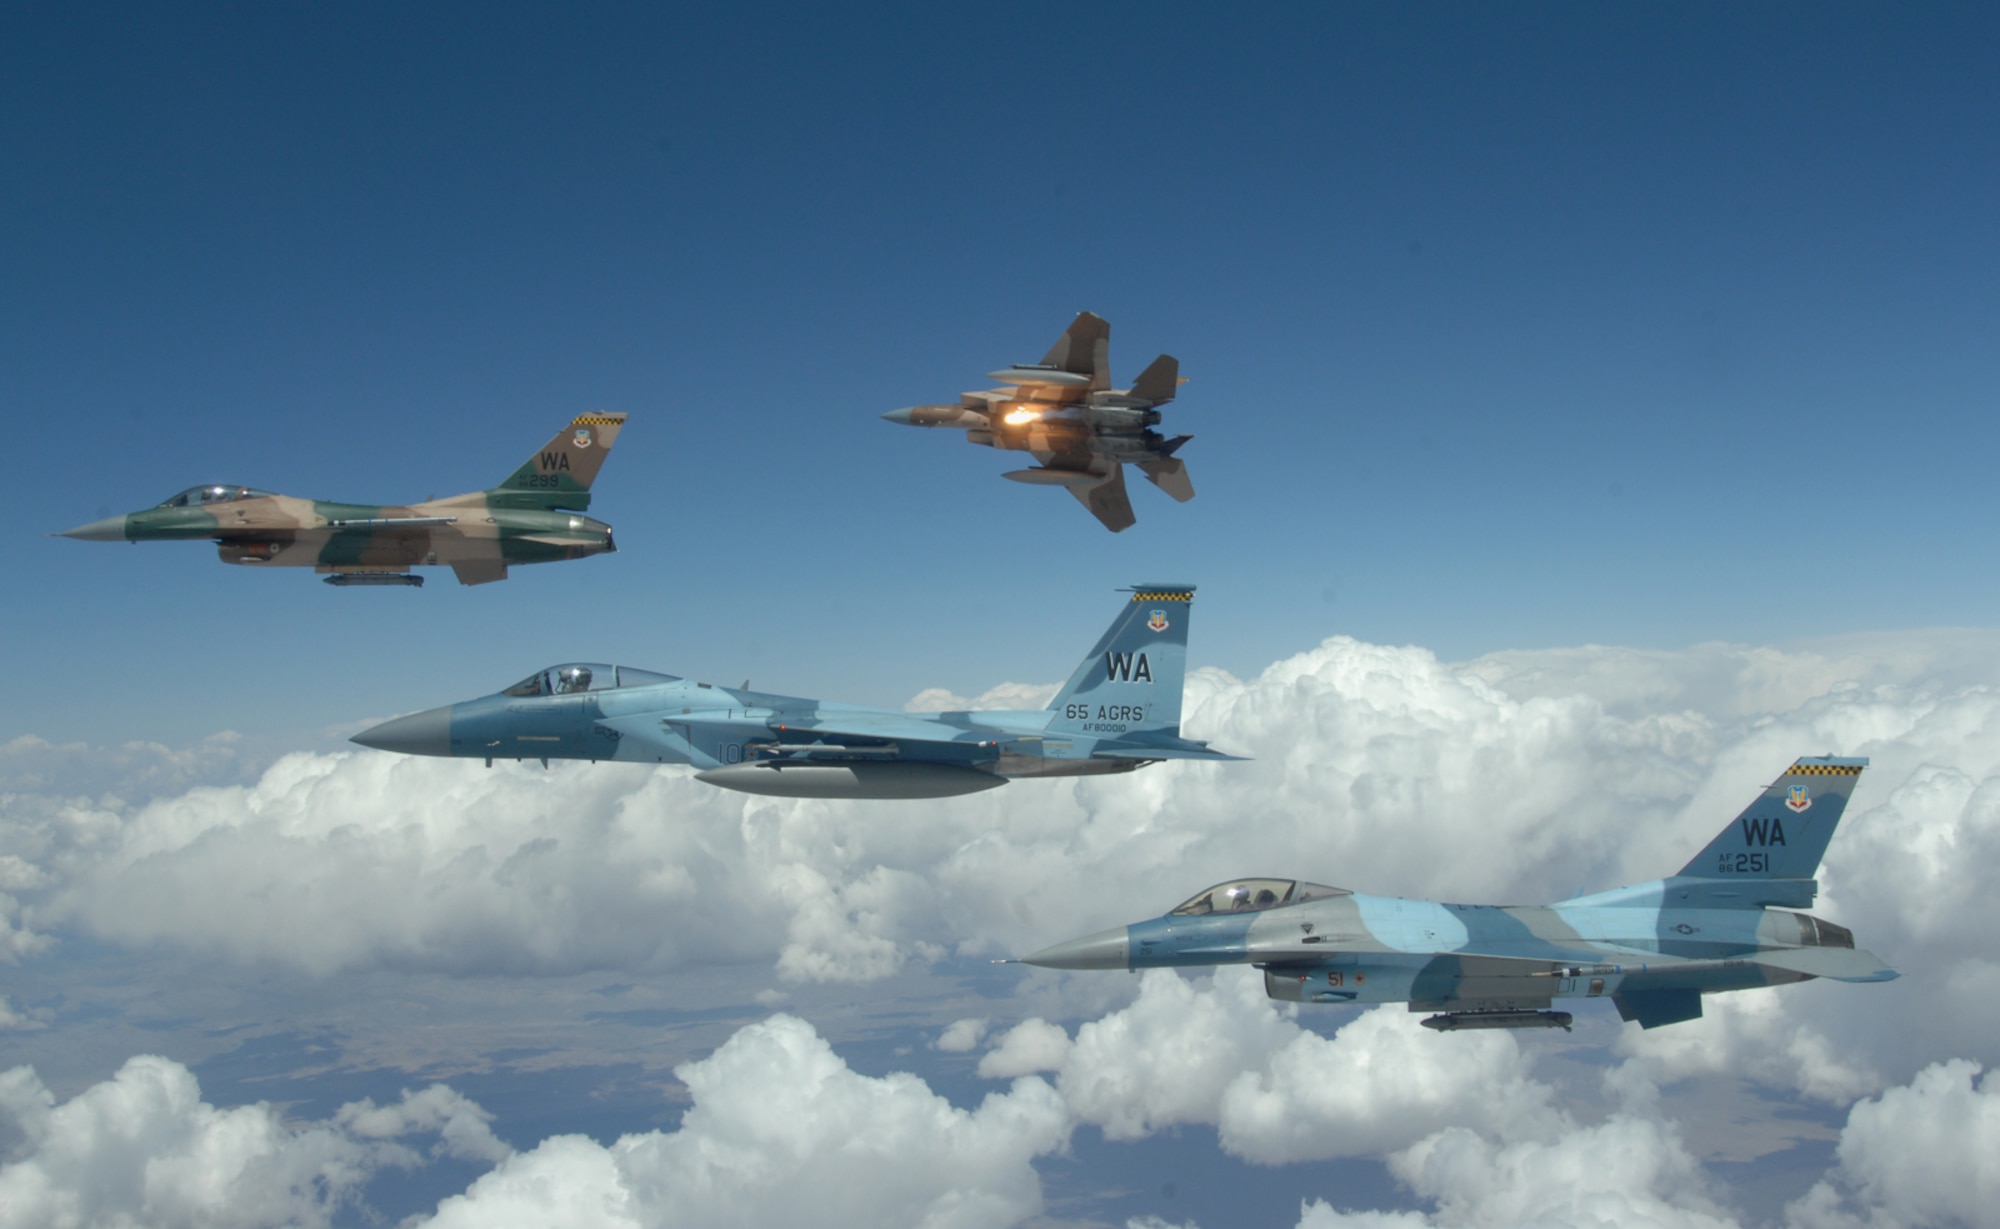 A flight of Aggressor F-15 Eagles and F-16 Fighting Falcons fly in formation over the Nevada Test and Training Ranges on June 5, 2008. The jets are assigned to the 64th and 65th Aggressor Squadrons at Nellis Air Force Base, Nev. The Aggressor mission is to prepare the combat air forces, joint and allied aircrews for tomorrowÕs victories with challenging and realistic threat replication, training, academics and feedback.
(U.S. Air Force photo/ Master Sgt. Kevin J. Gruenwald)